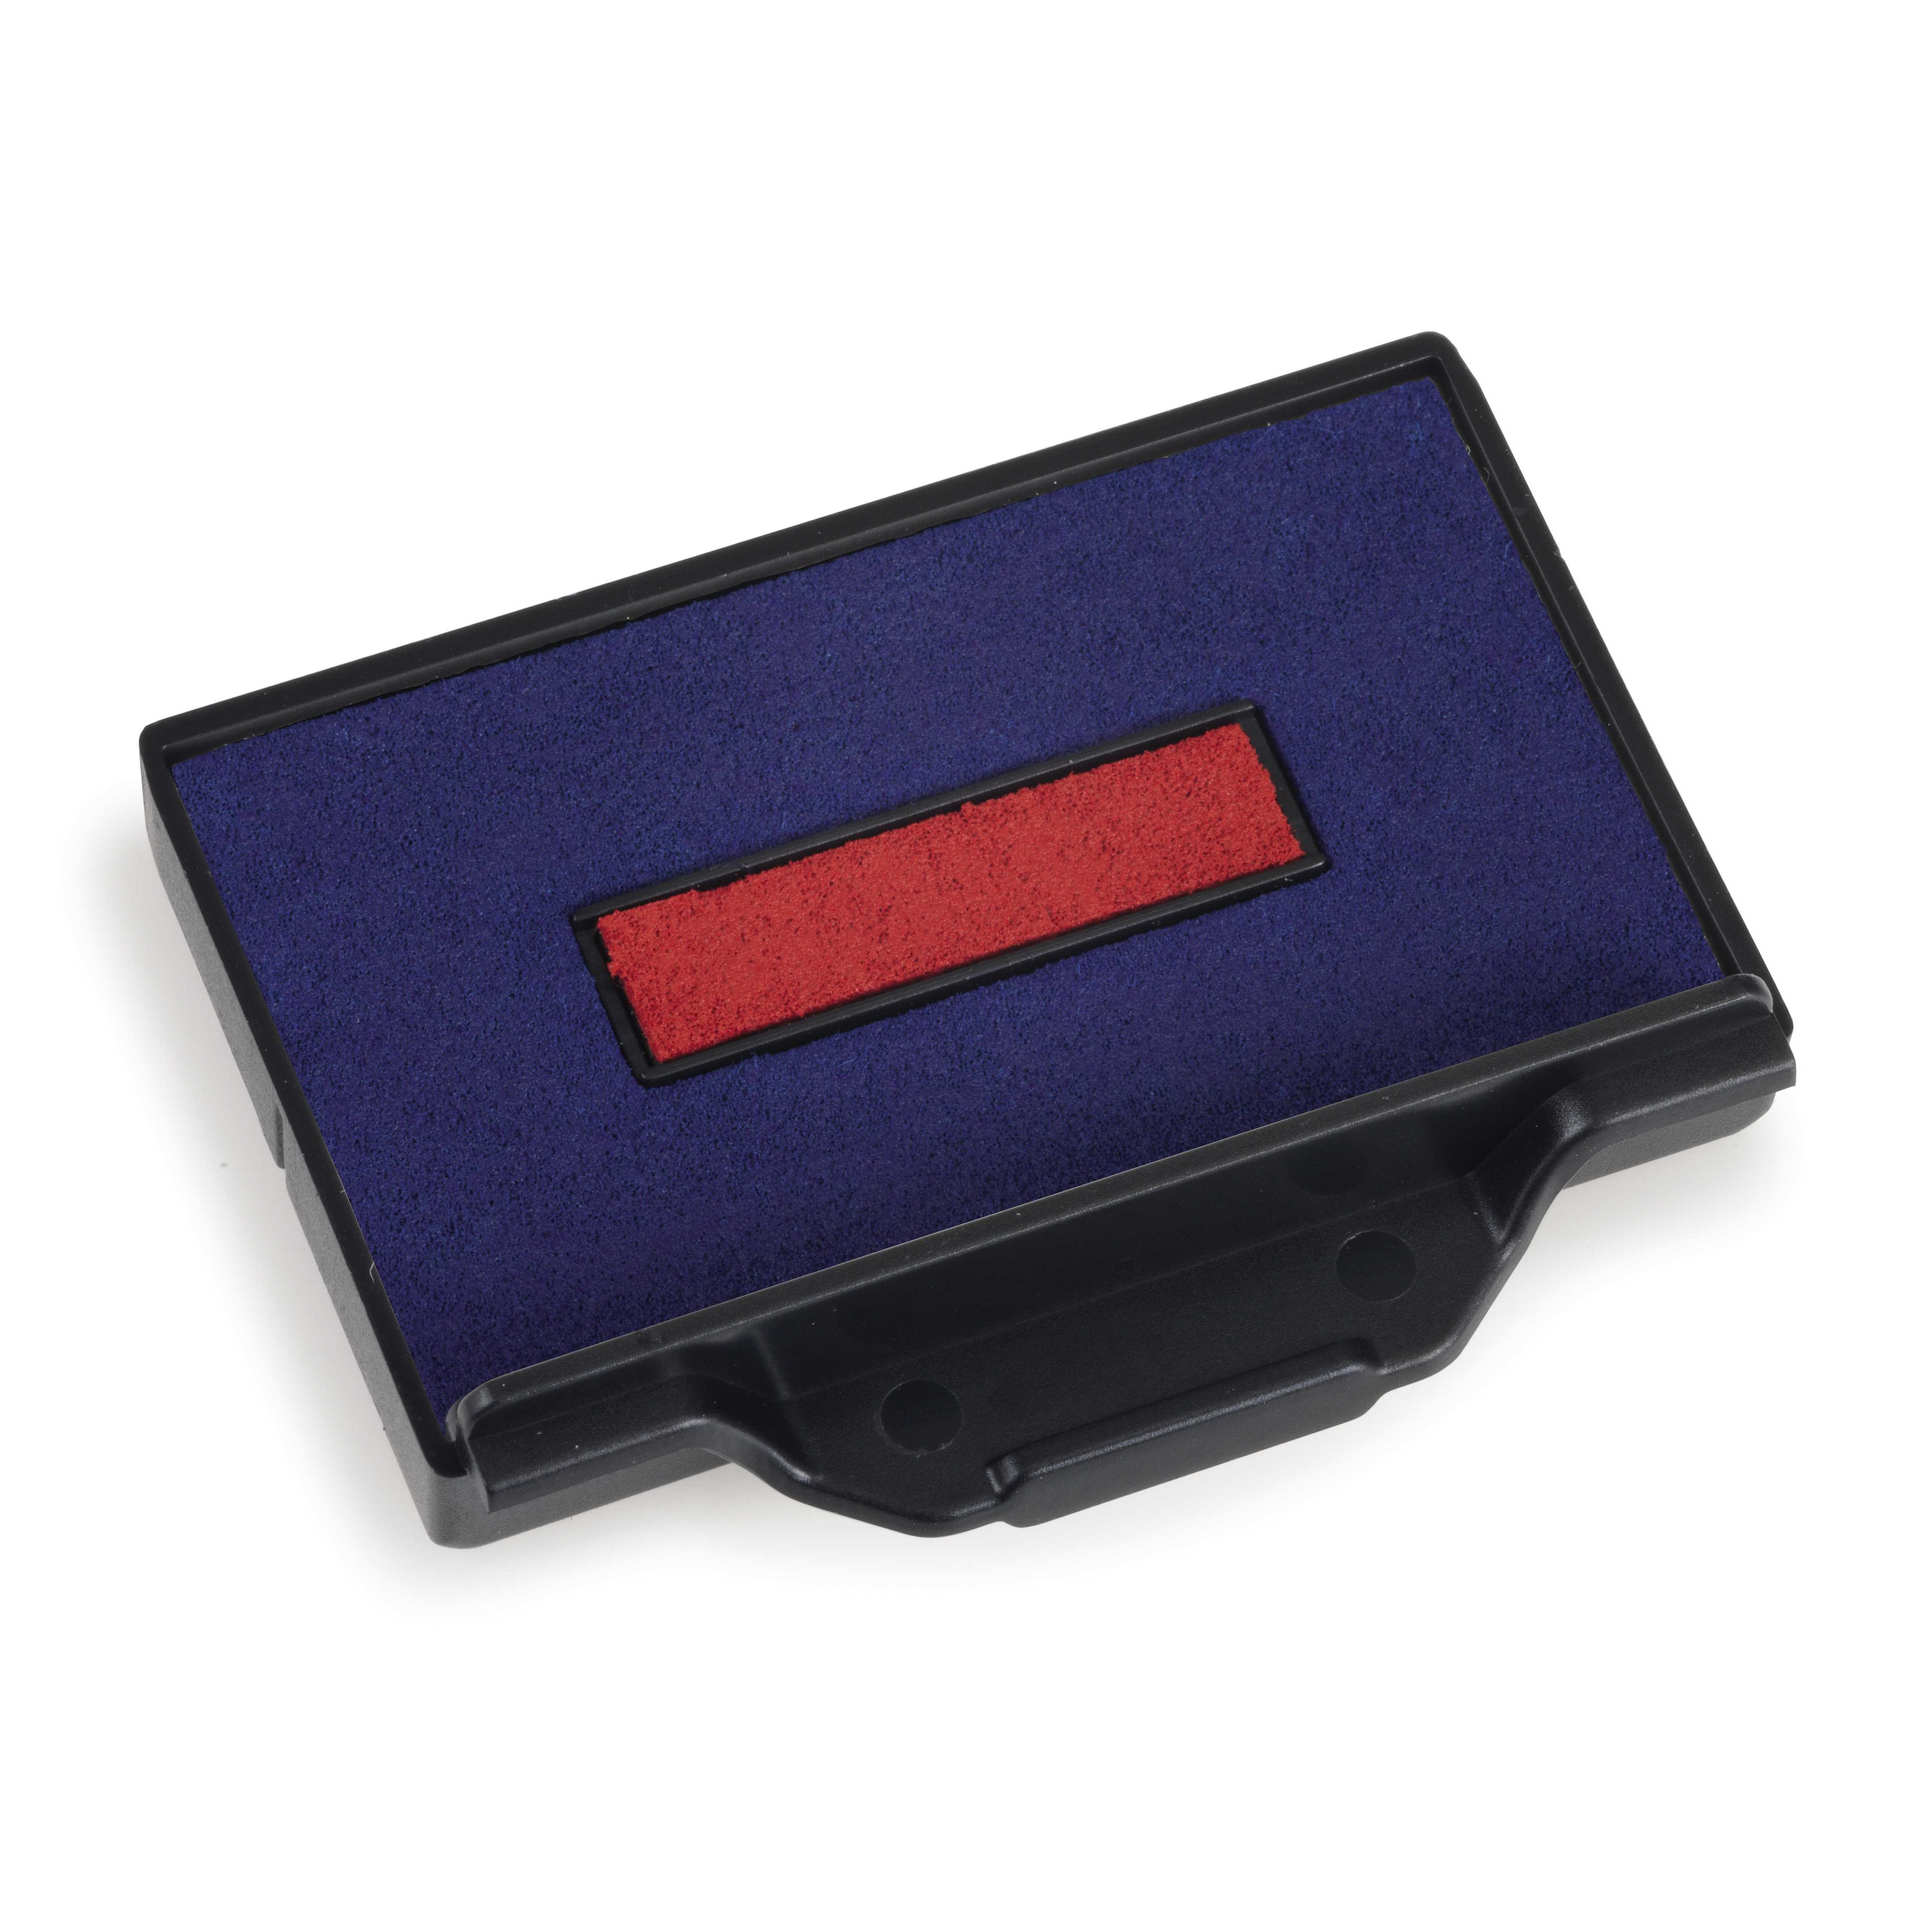 Replacement Pad for Trodat 5203 Self Inking Stamp - Blue/Red Ink Color